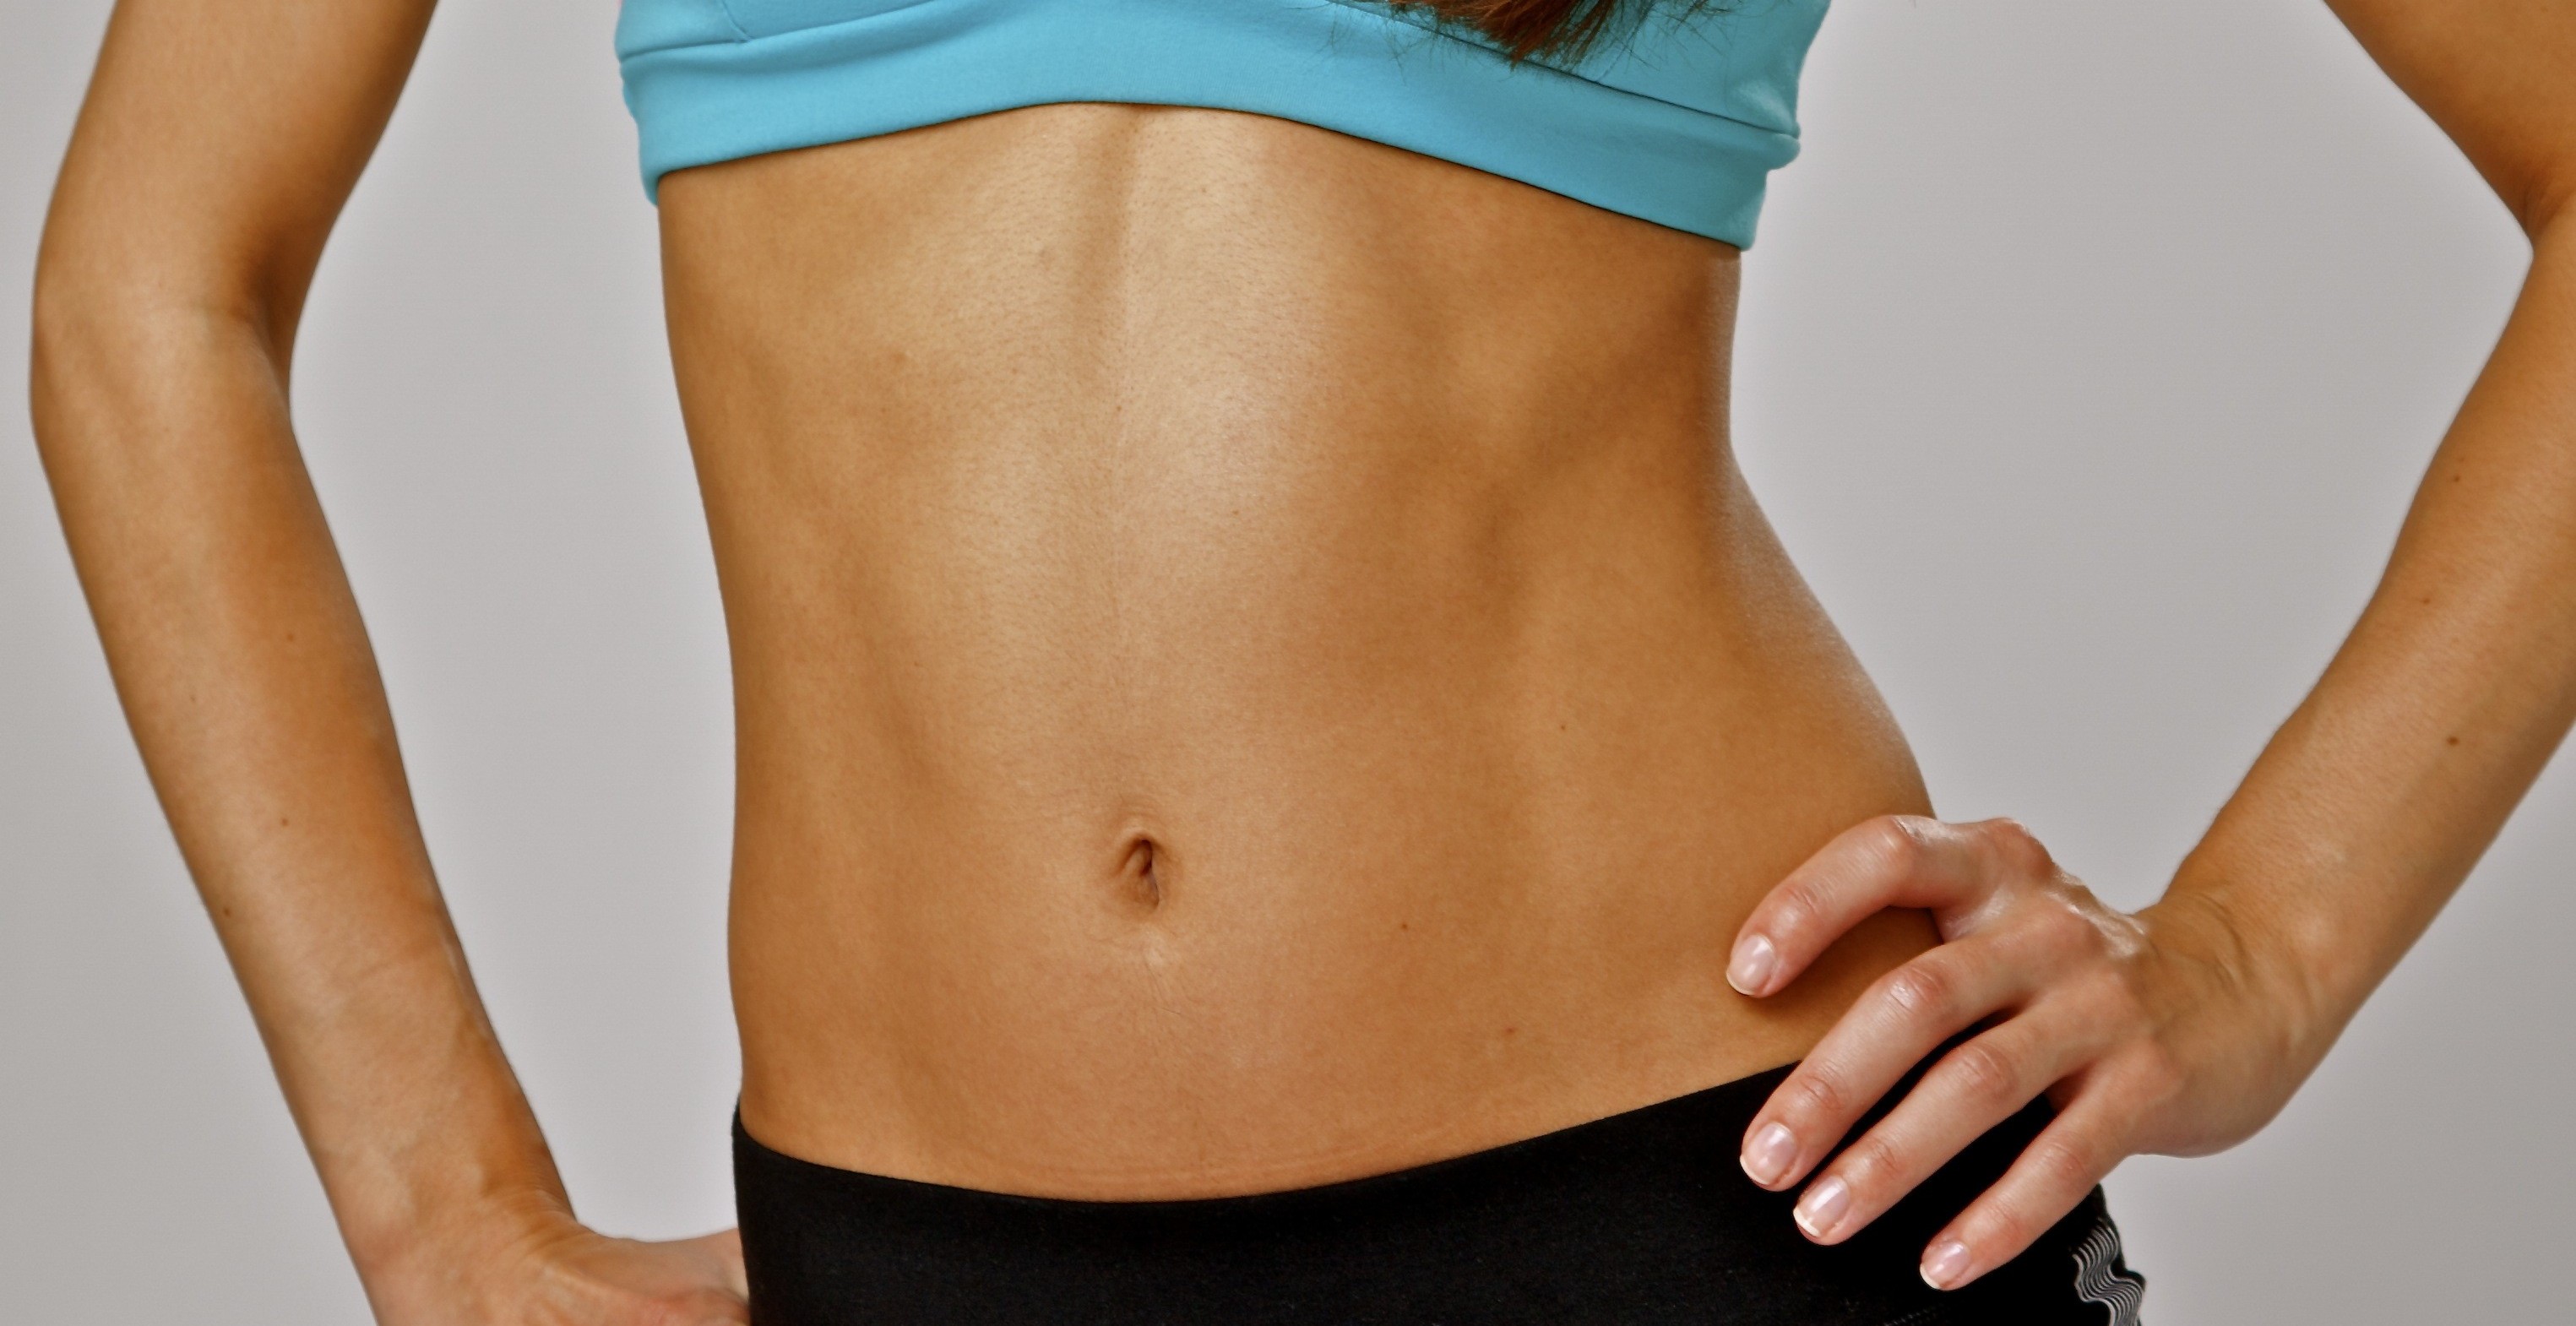 Beat Belly Bloat With These Fitness Videos and Exercises For a Flatter  Stomach.